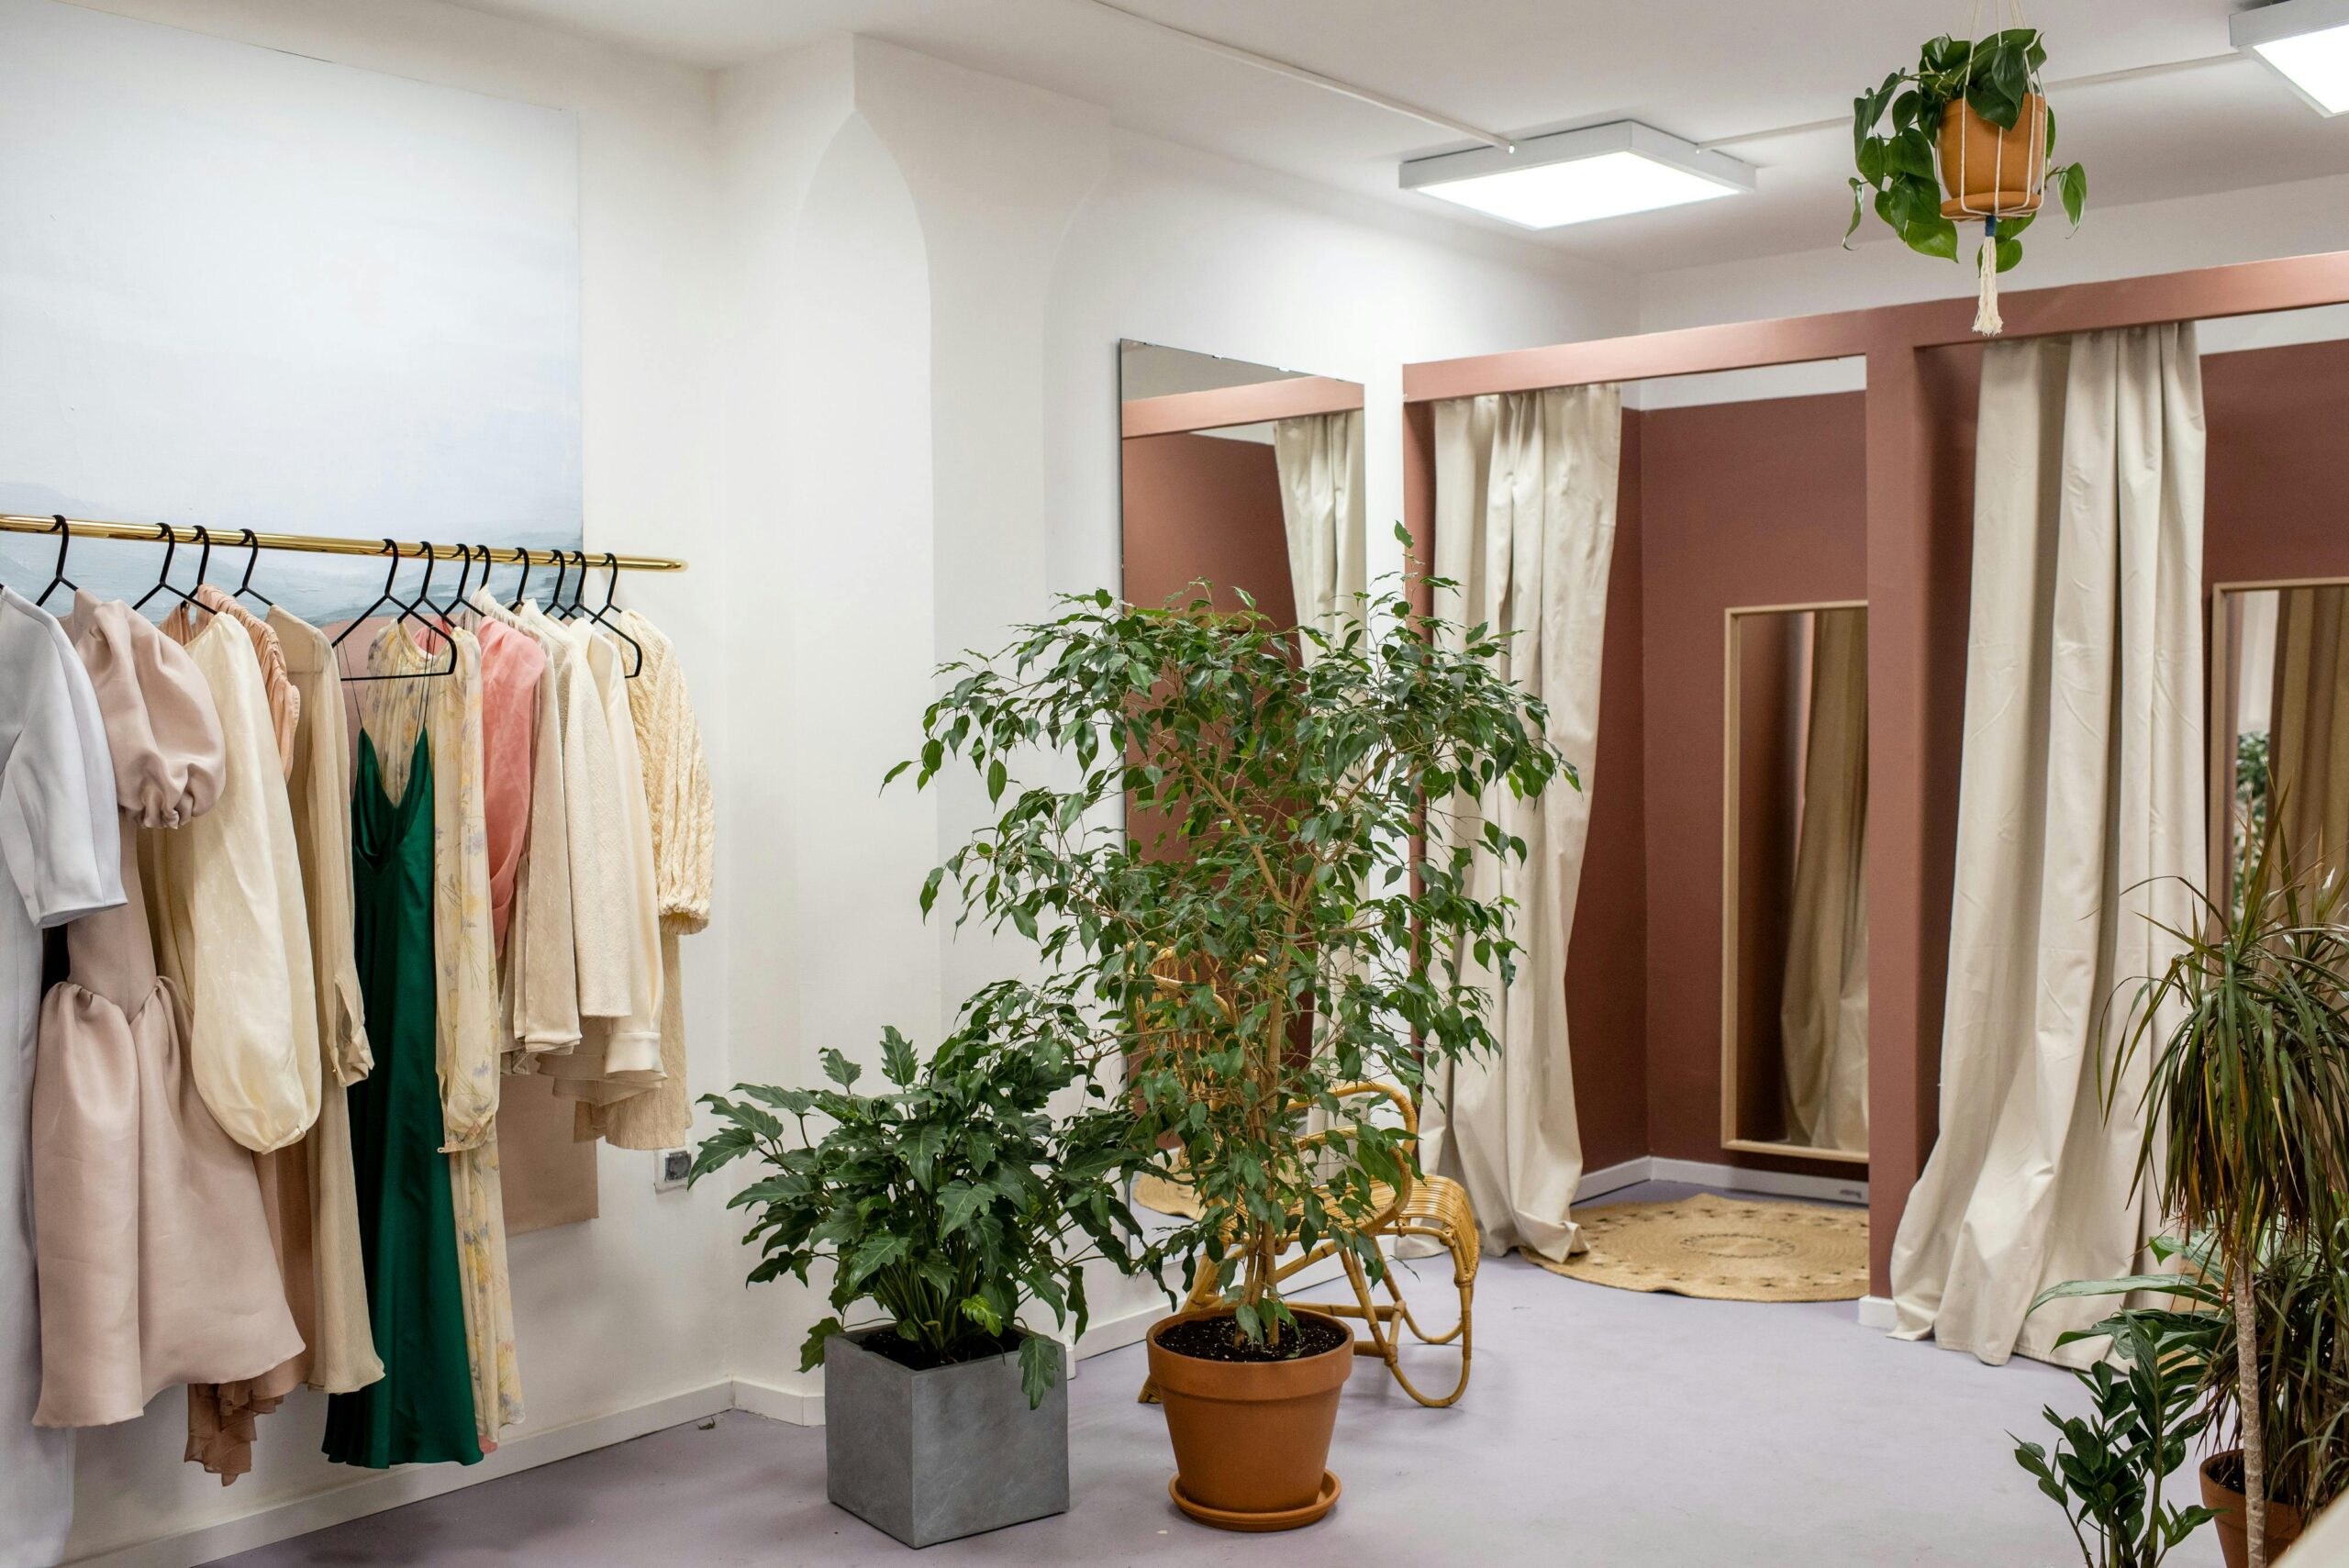 Clothing shop with fitting rooms